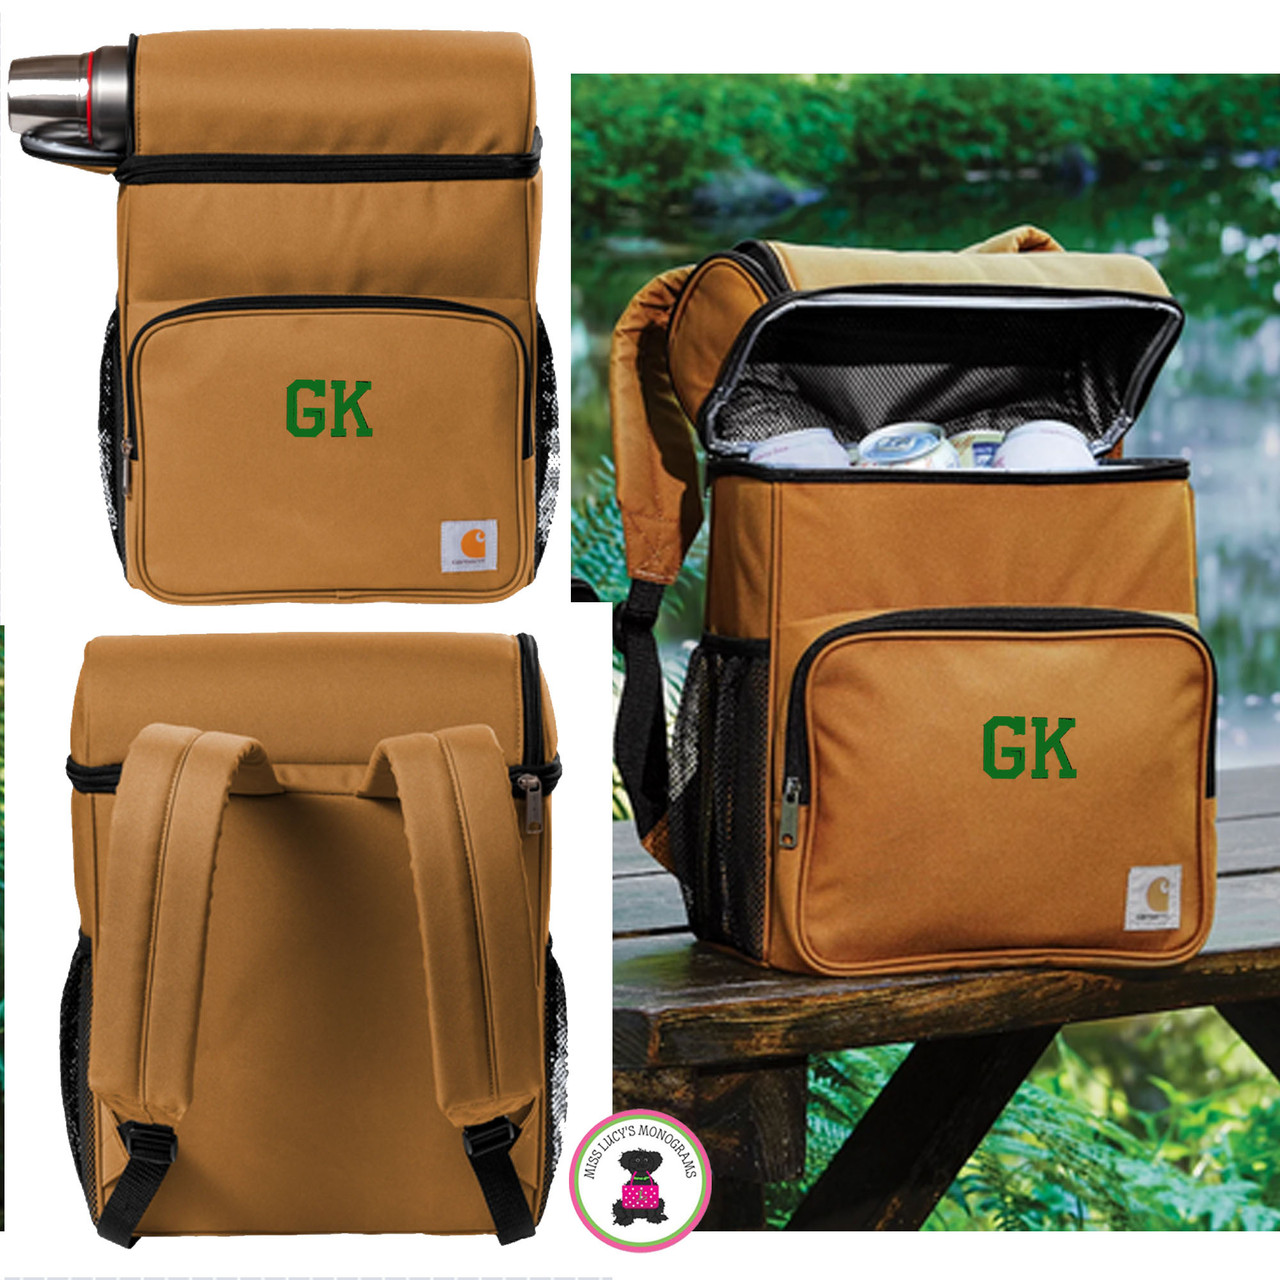 FOR HIM Monogrammed Carhartt® BACKPACK 20-Can Cooler - FREE SHIP-Groomsmen  Gift/Father's Day Gift/Grad Gift/Gift for Him/Group Discount/Hiker